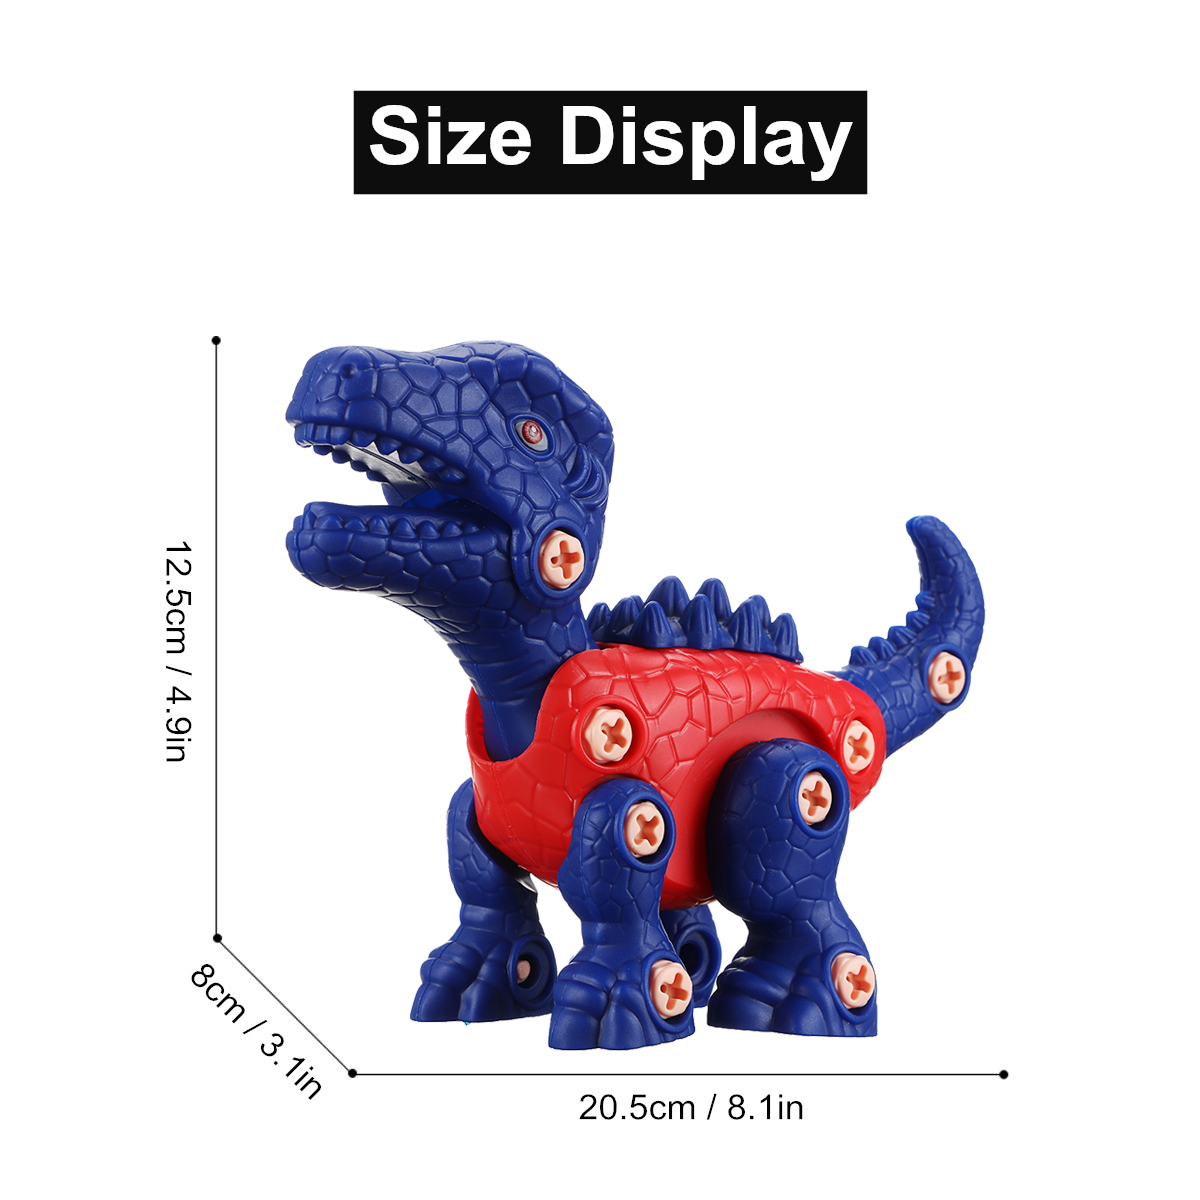 Realistic-Dinosaur-Model-Dino-Toy-Electric-Drill-Toy-Figures-Play-Set-Kids-Birthday-Christmas-Gifts-1784870-6